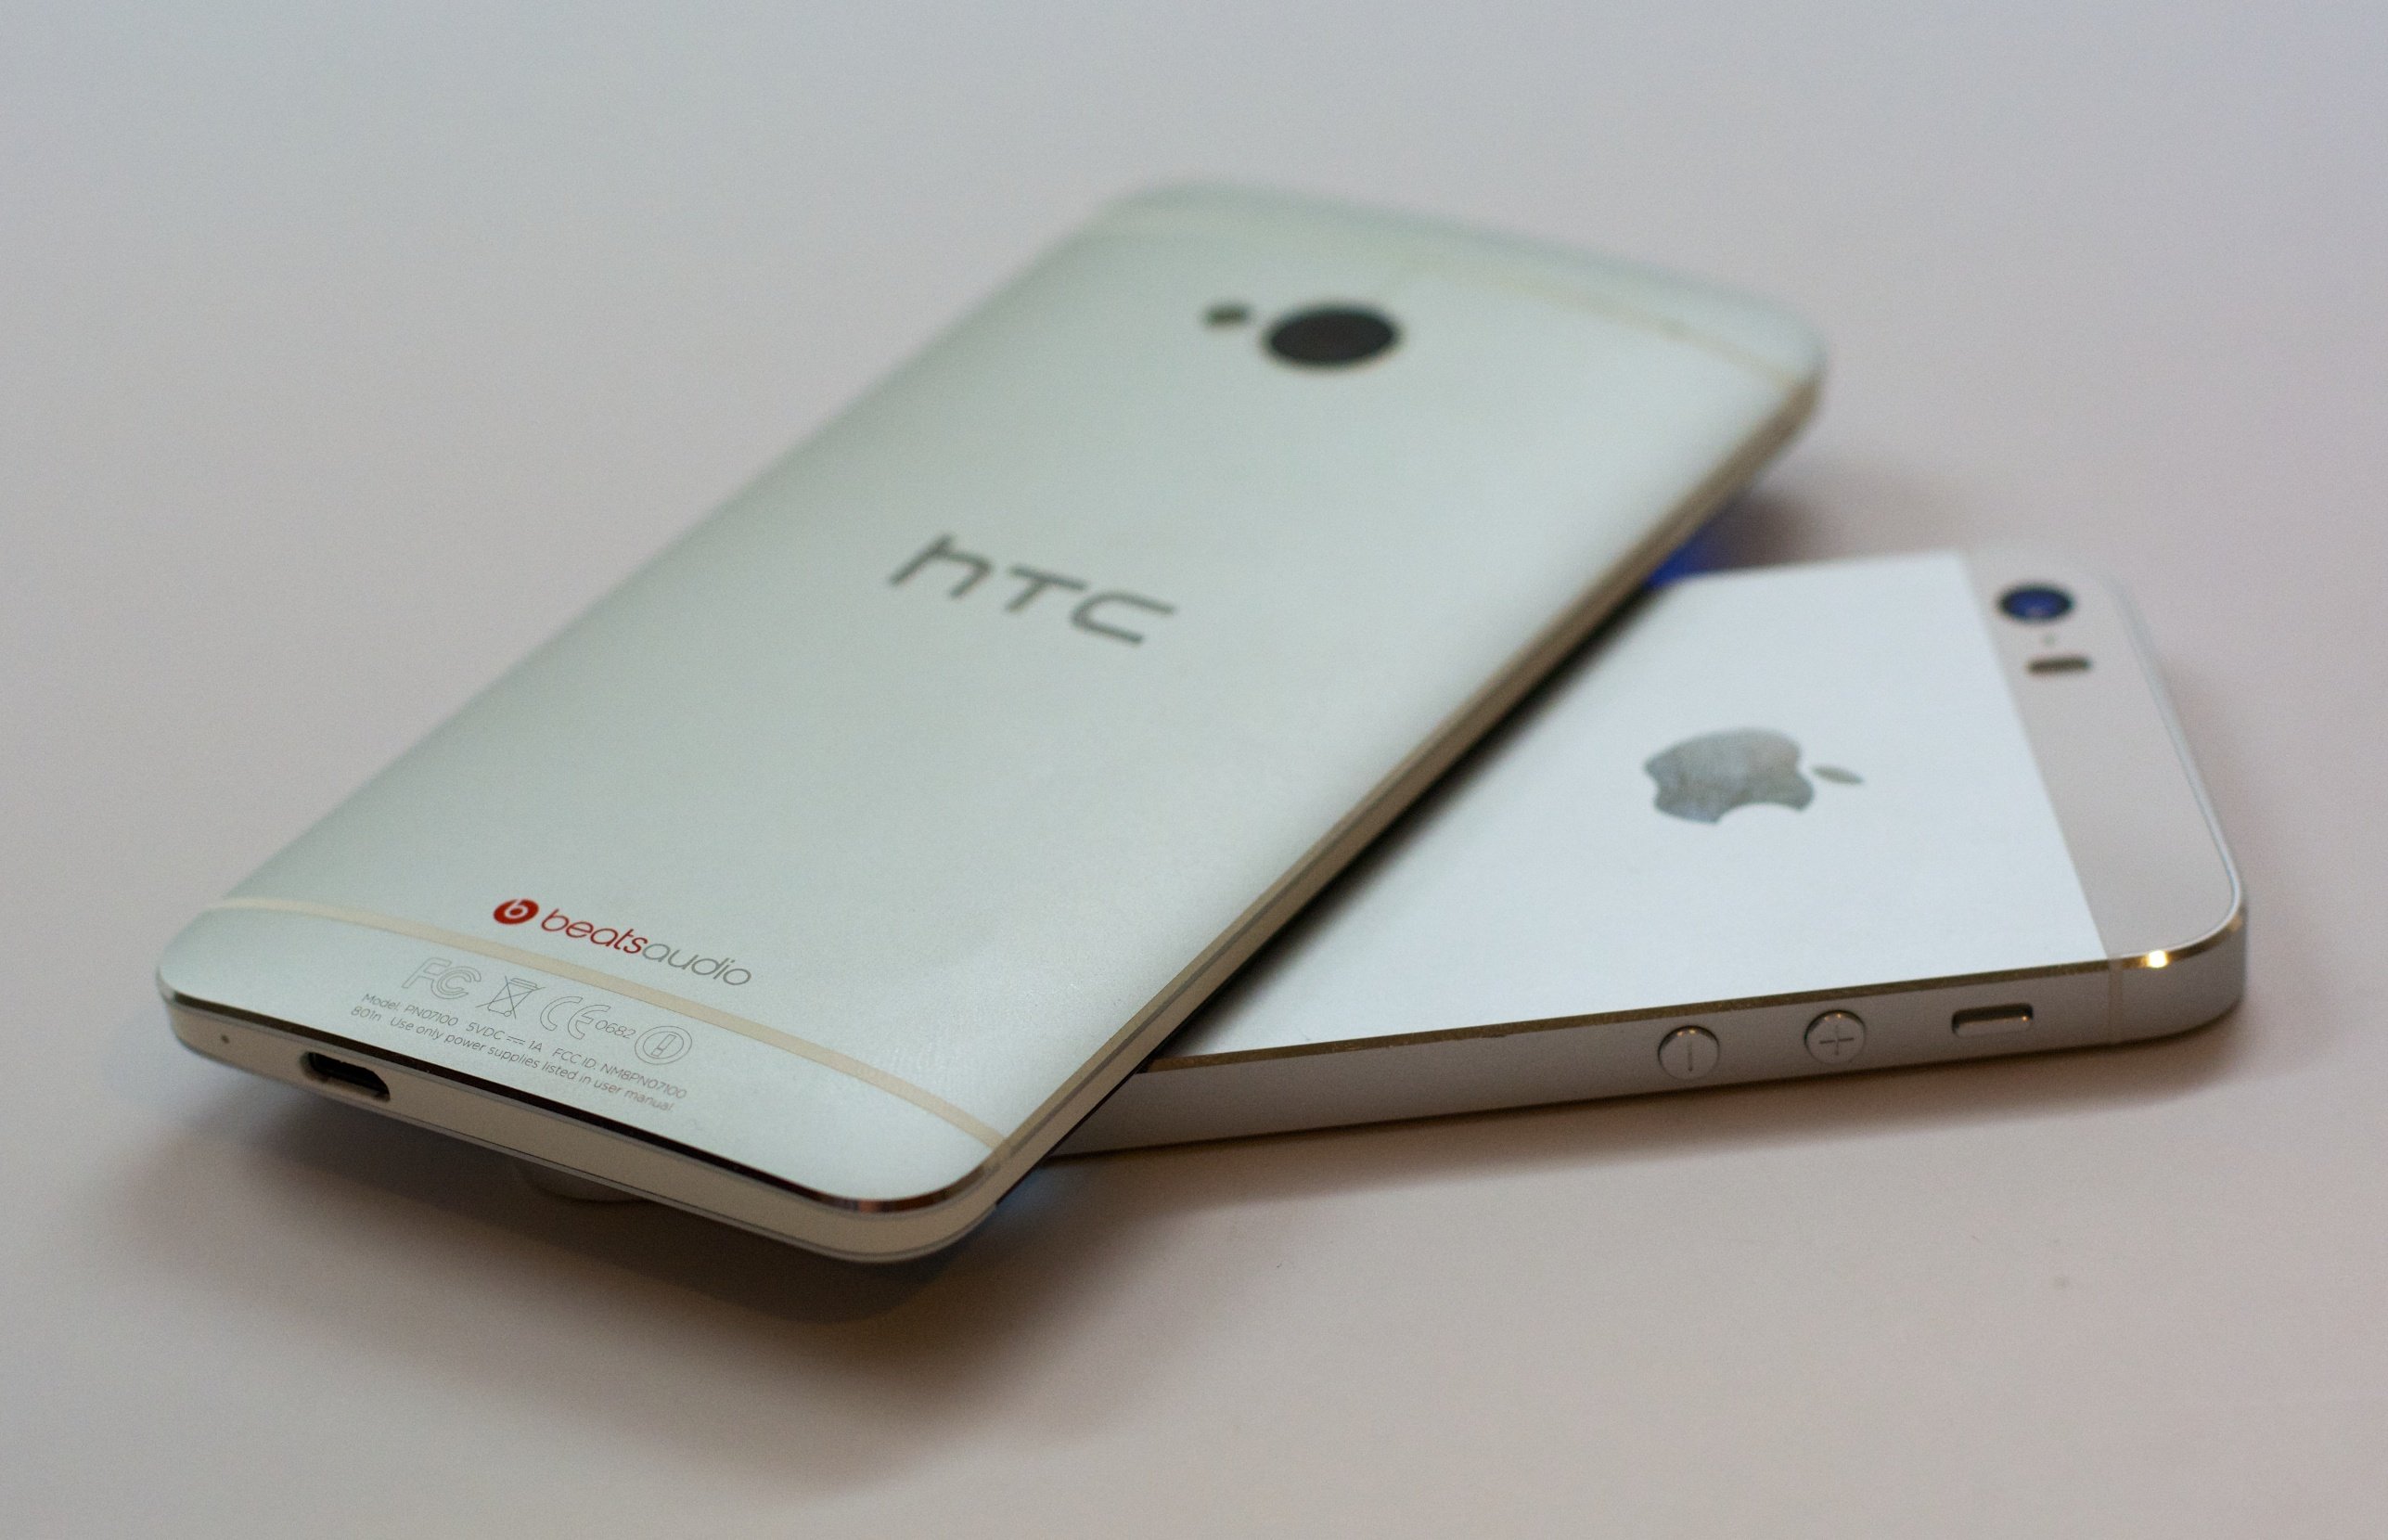 The HTC One and iPhone s5s share design traits.